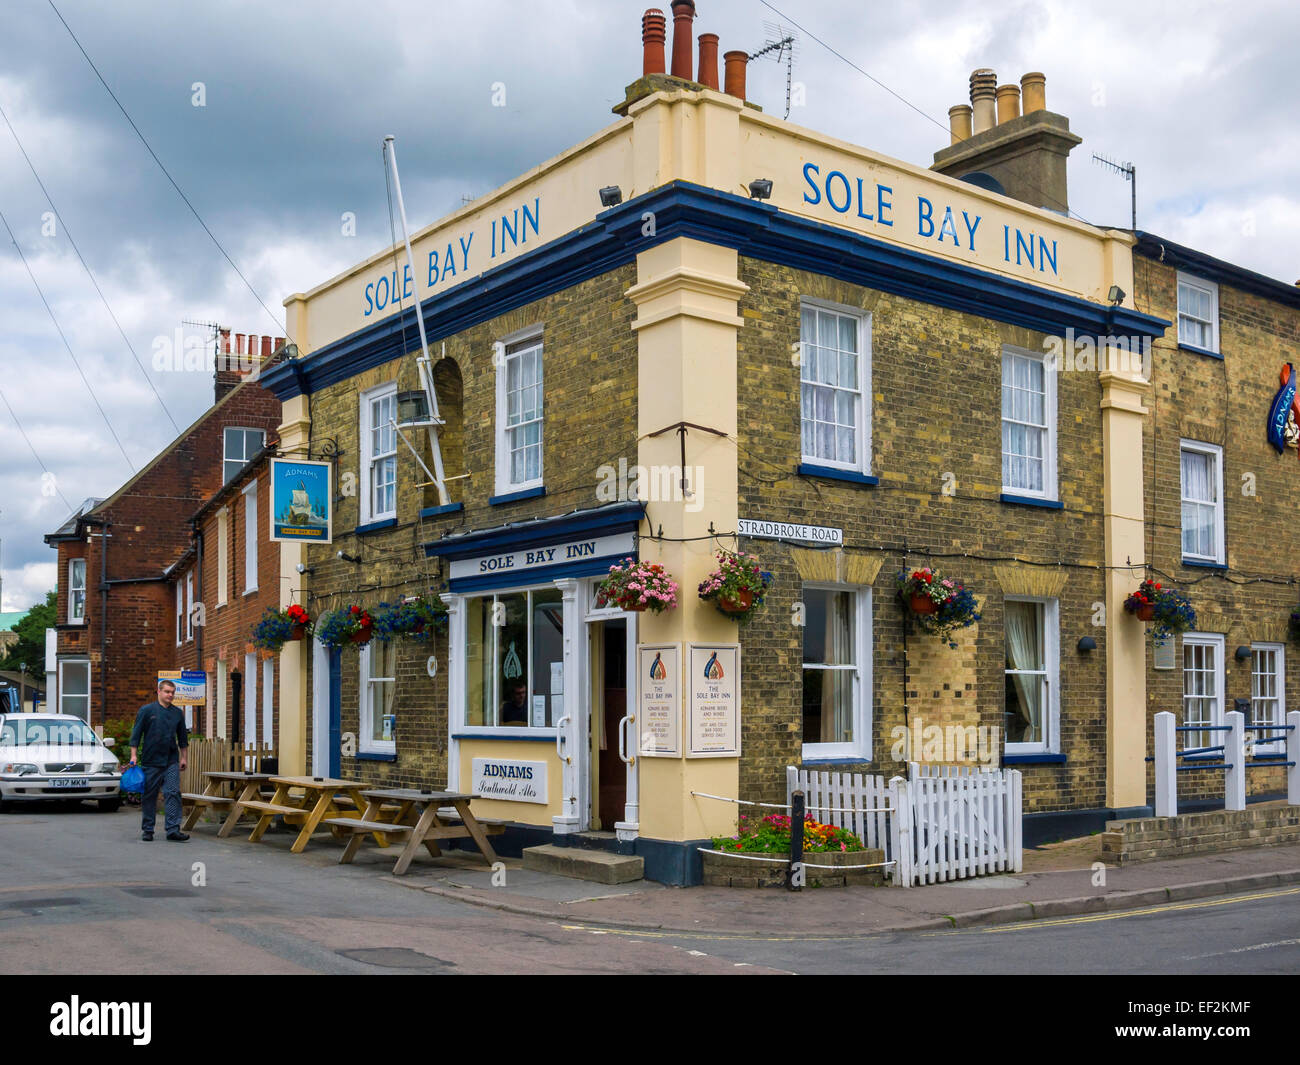 The Sole Bay Inn in Southwold named to commemorate the sea battle with the Dutch at nearby Sole Bay in 1672 Stock Photo